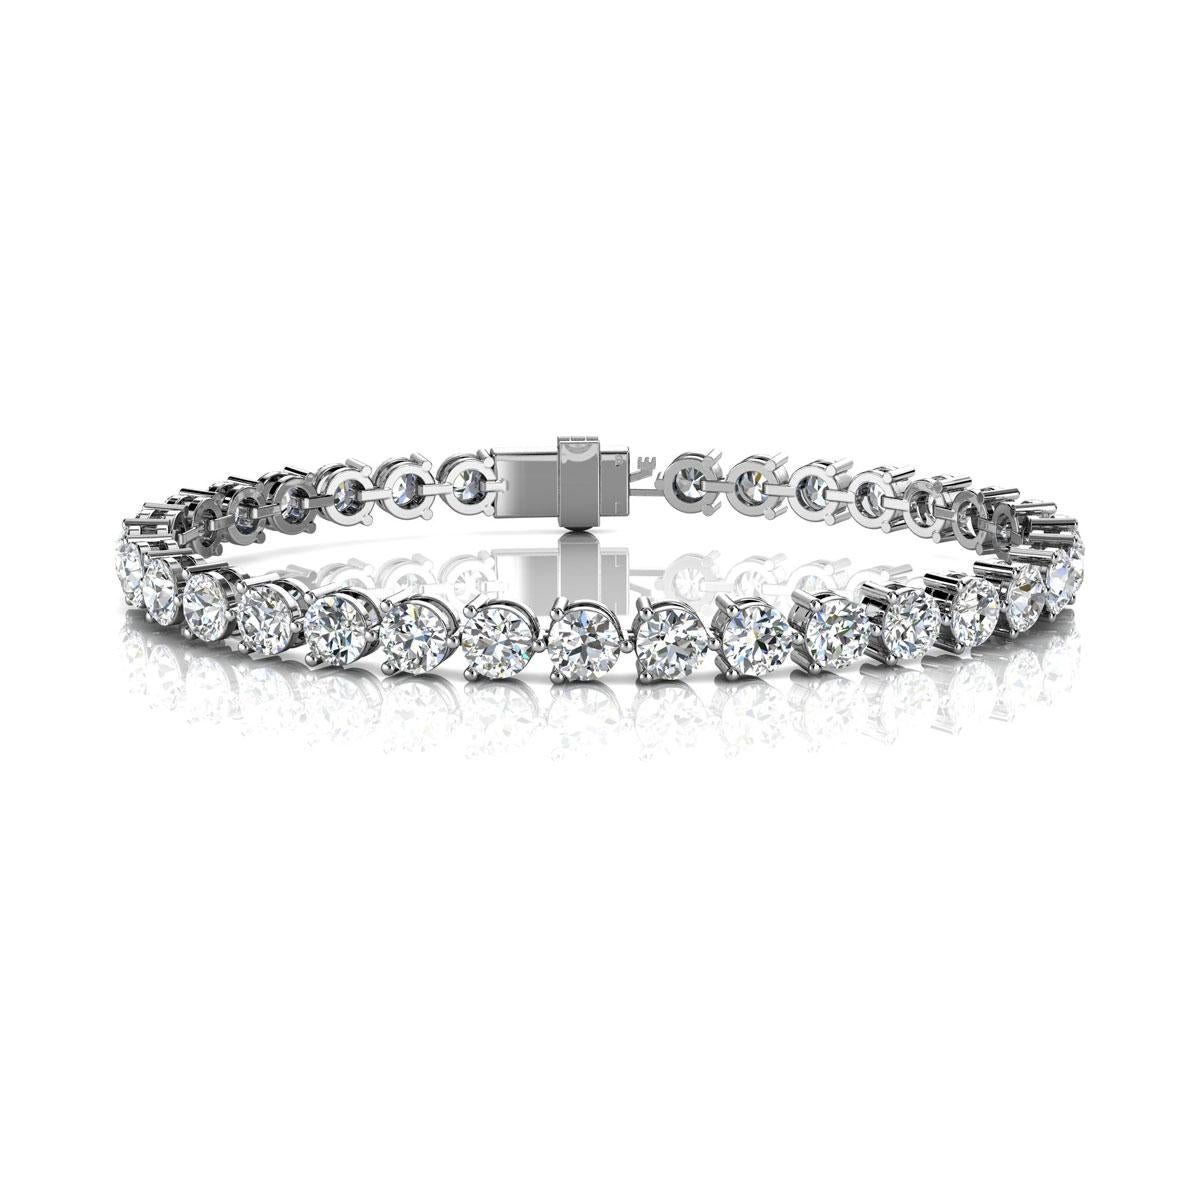 A timeless three prongs diamonds tennis bracelet. Experience the Difference!

Product details: 

Center Gemstone Type: NATURAL DIAMOND
Center Gemstone Color: WHITE
Center Gemstone Shape: ROUND
Center Diamond Carat Weight: 10
Metal: 14K White